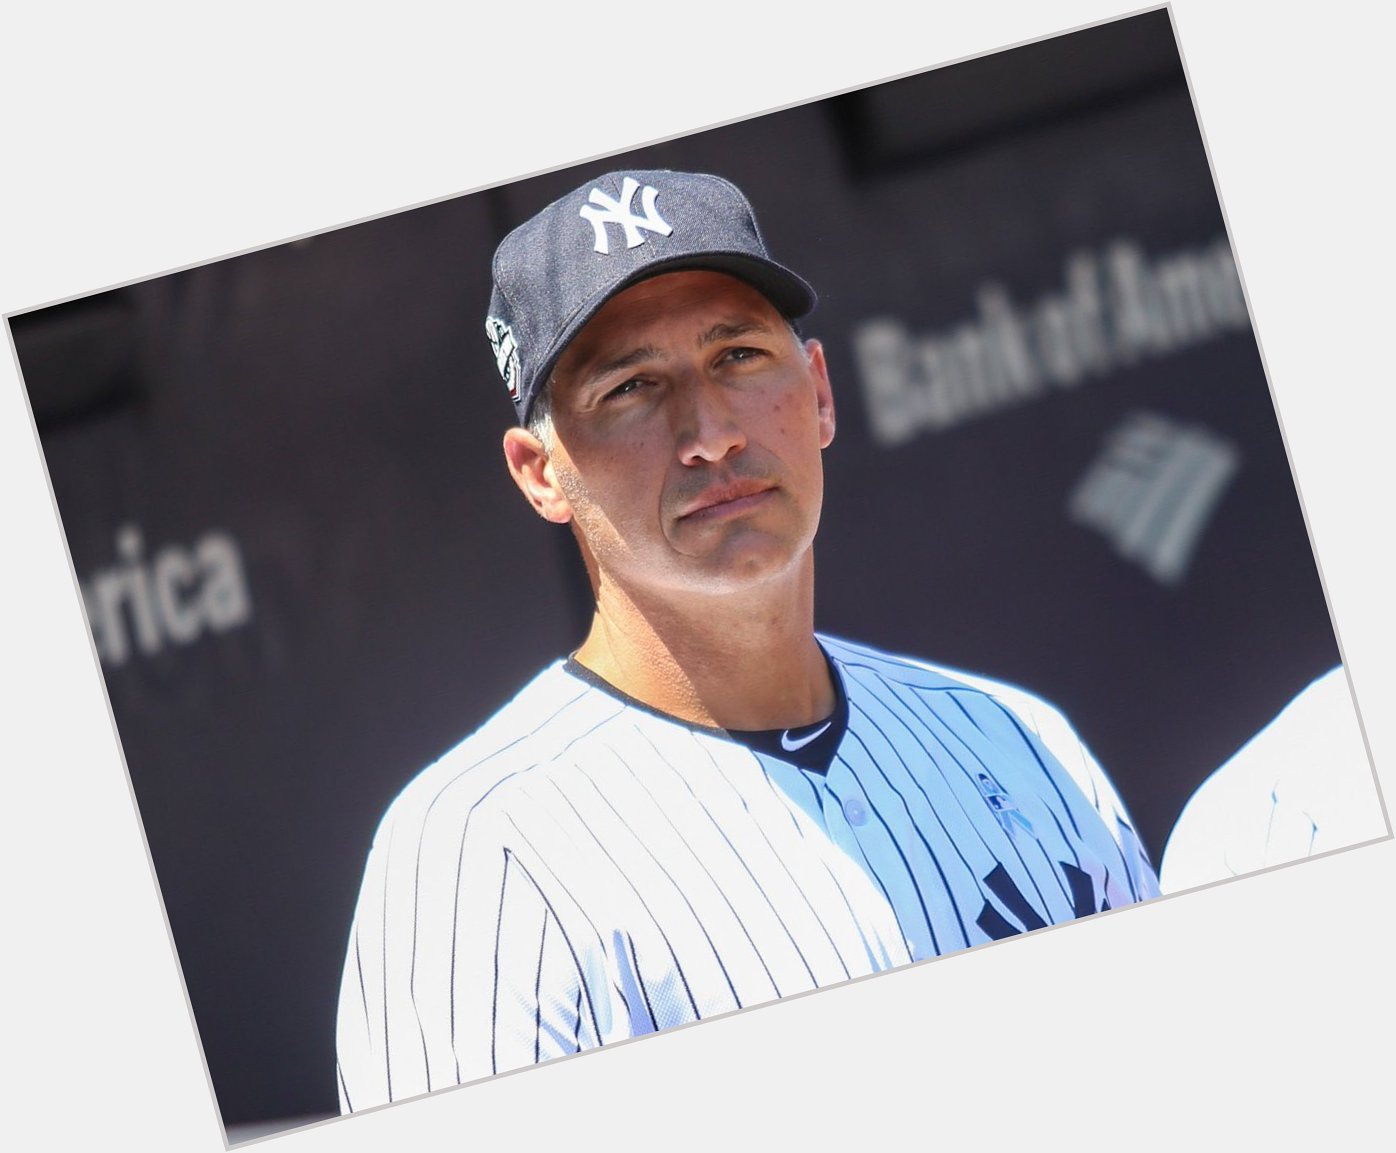 Happy birthday to Andy Pettitte! 
He turns 48 today. 